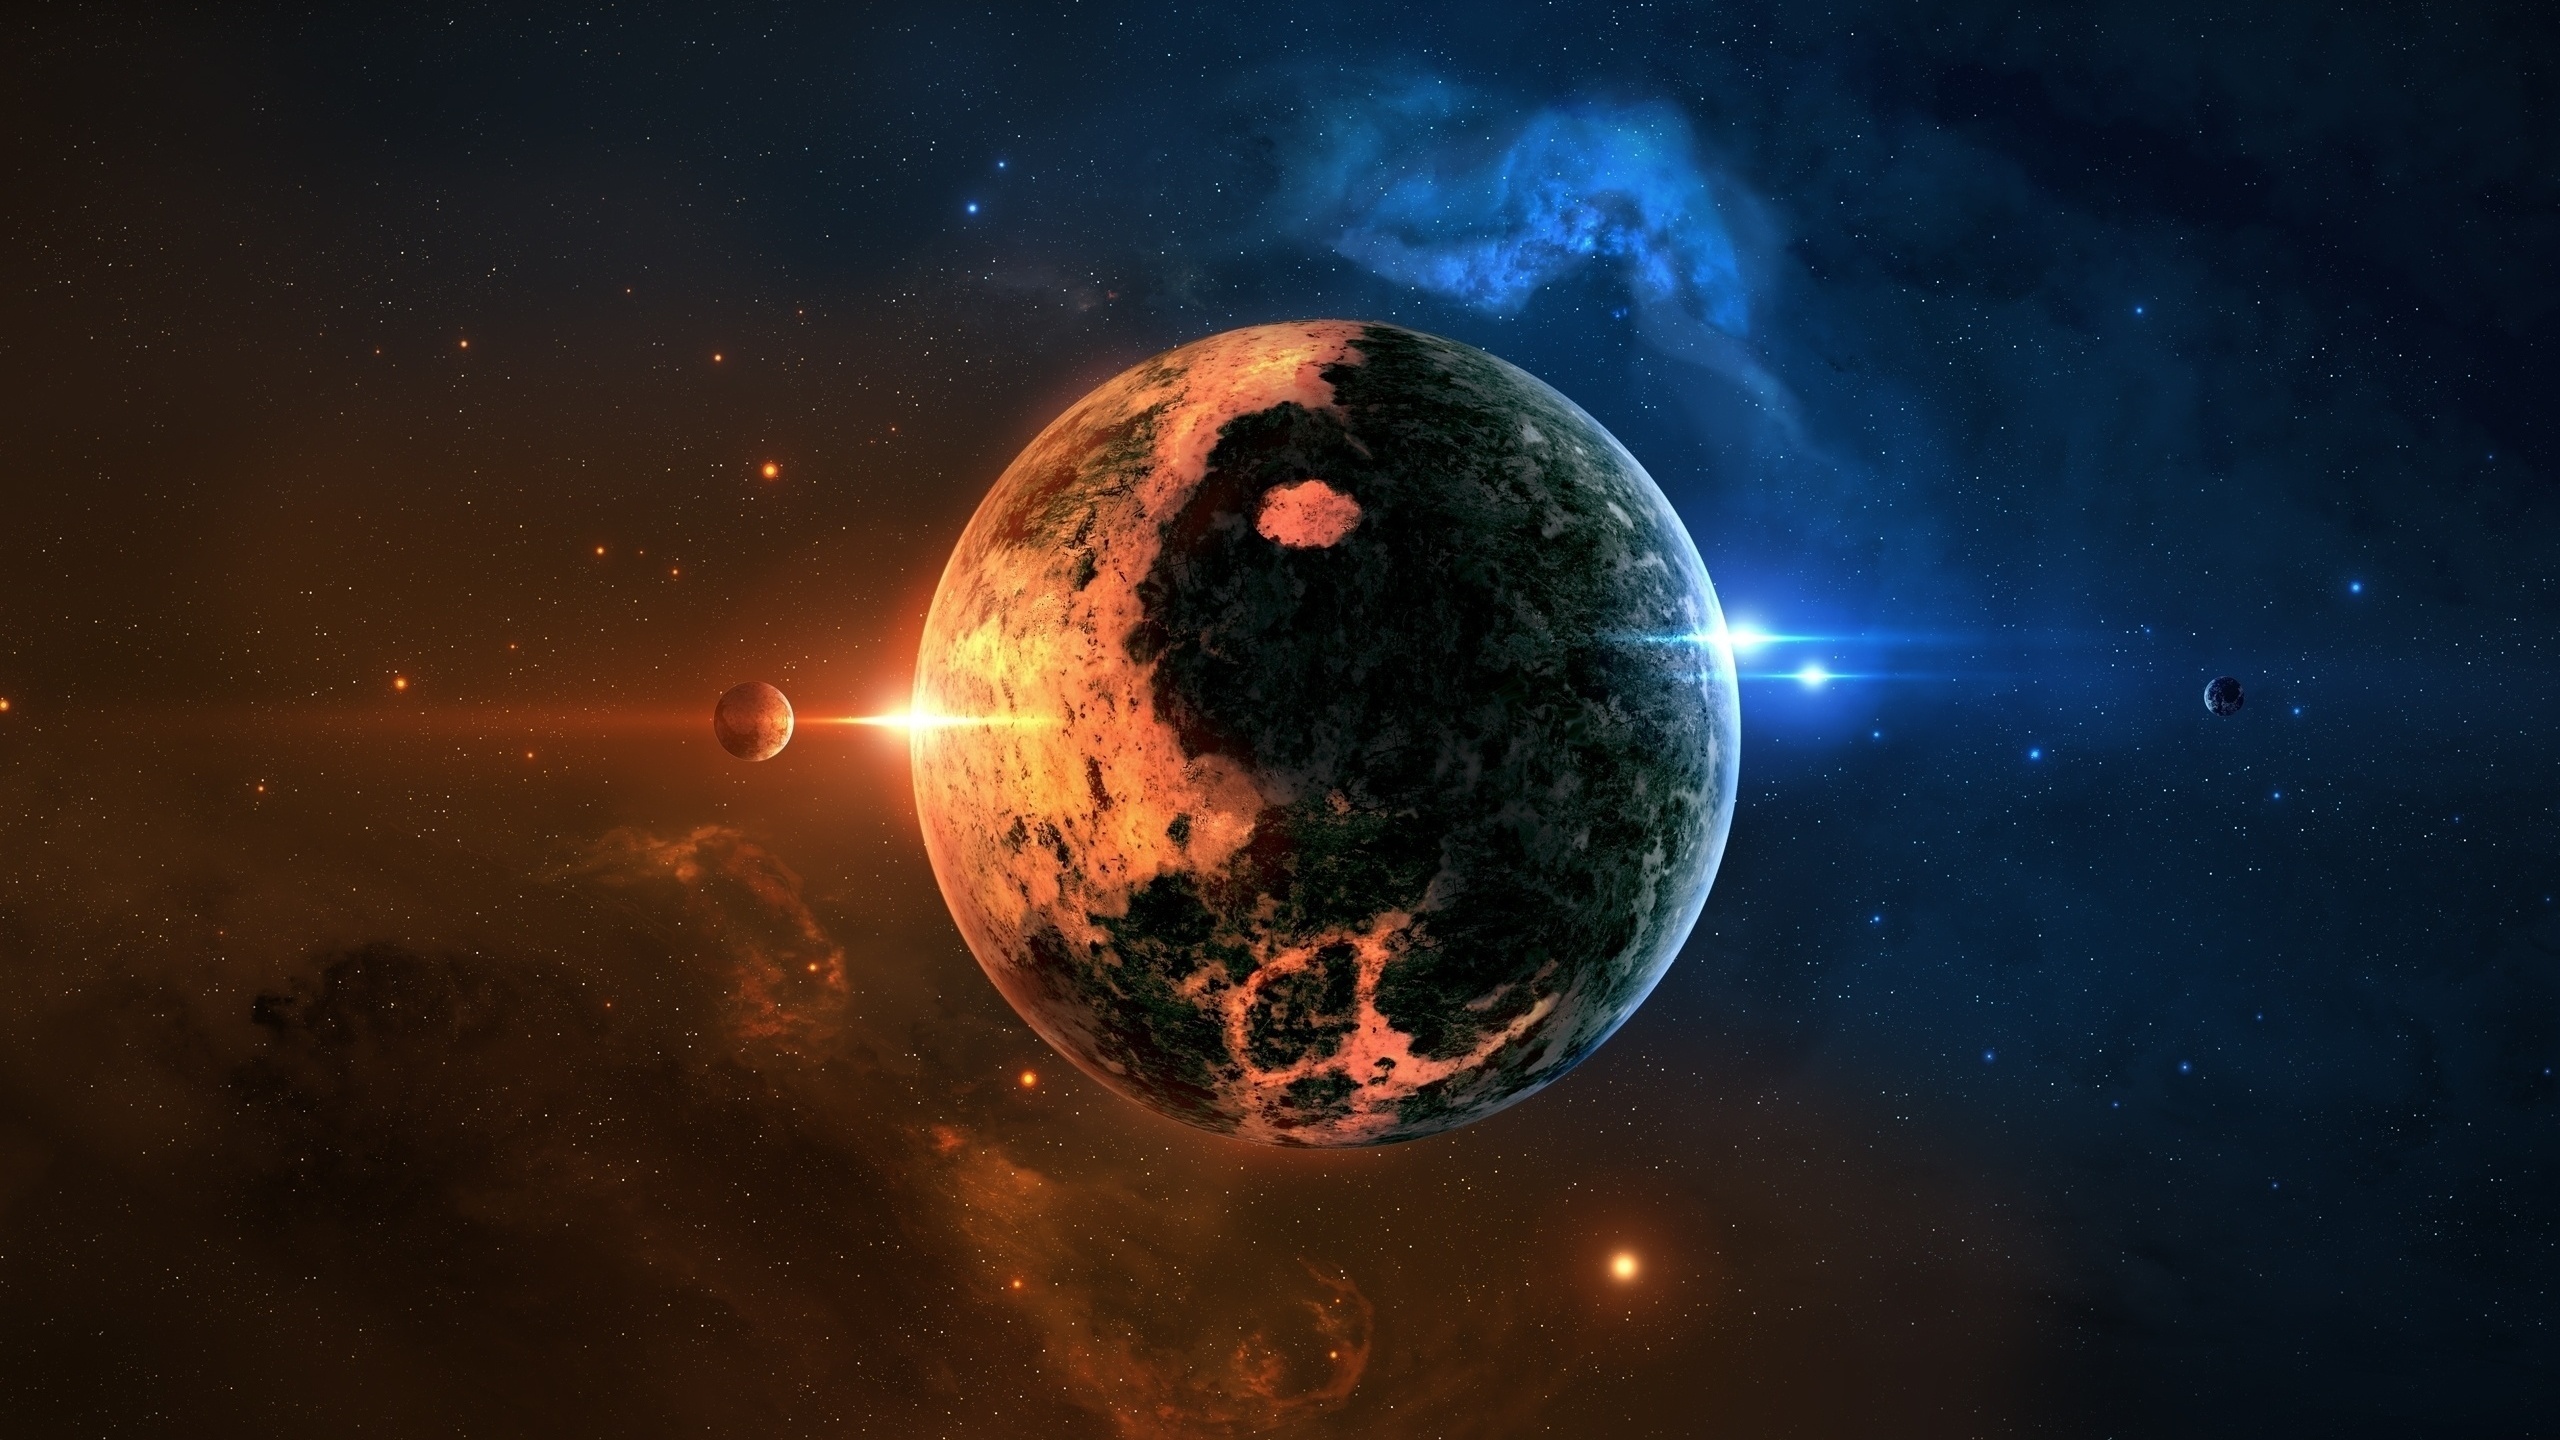 Wallpaper Planets Space 2560x1440